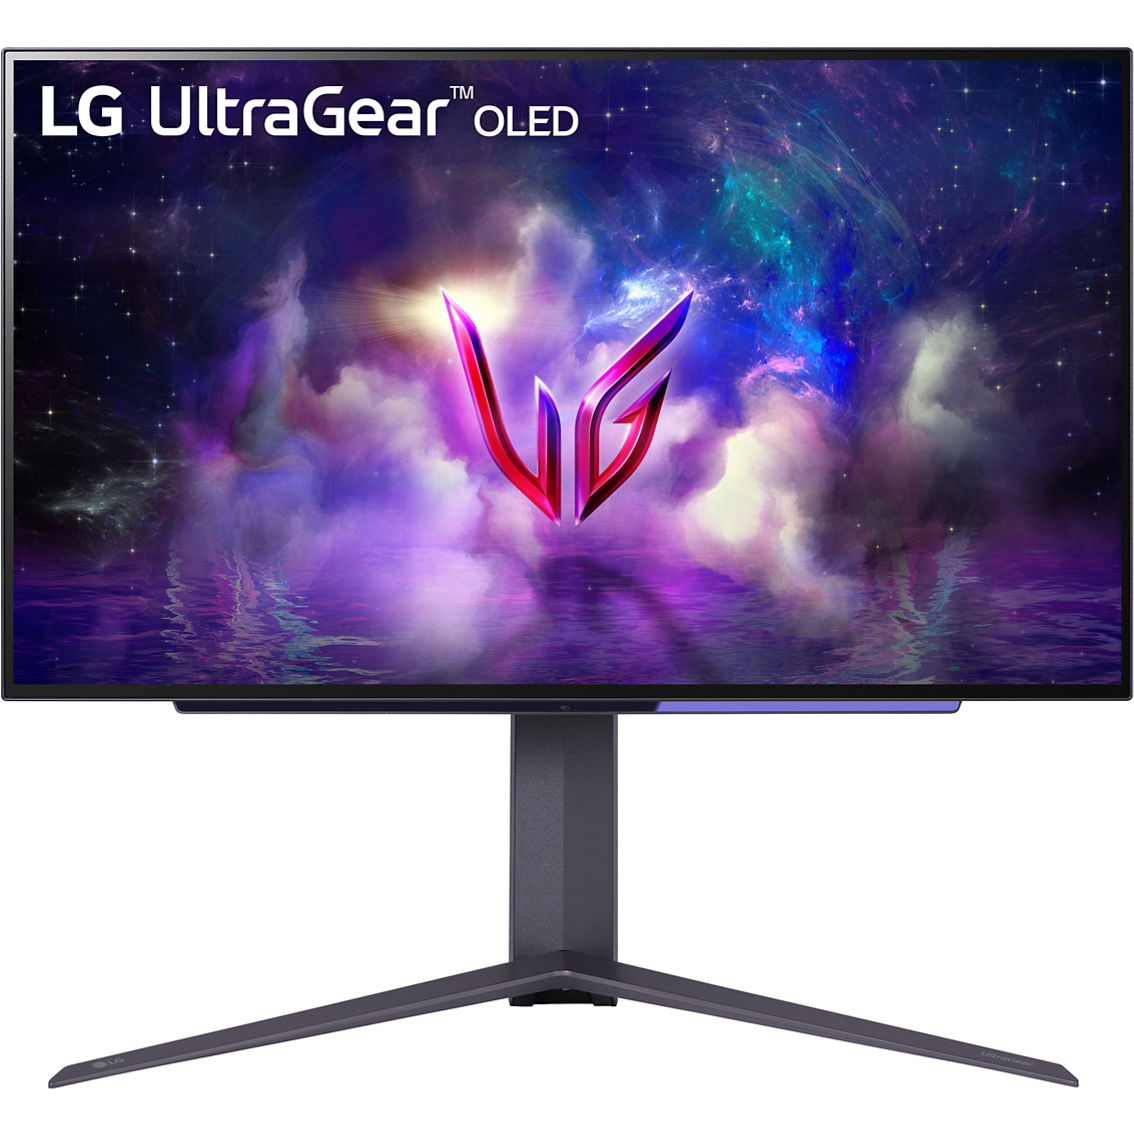 LG 27 in. UltraGear OLED 240Hz QHD Gaming Monitor with G-SYNC 27GS95QE-B - Image 8 of 9